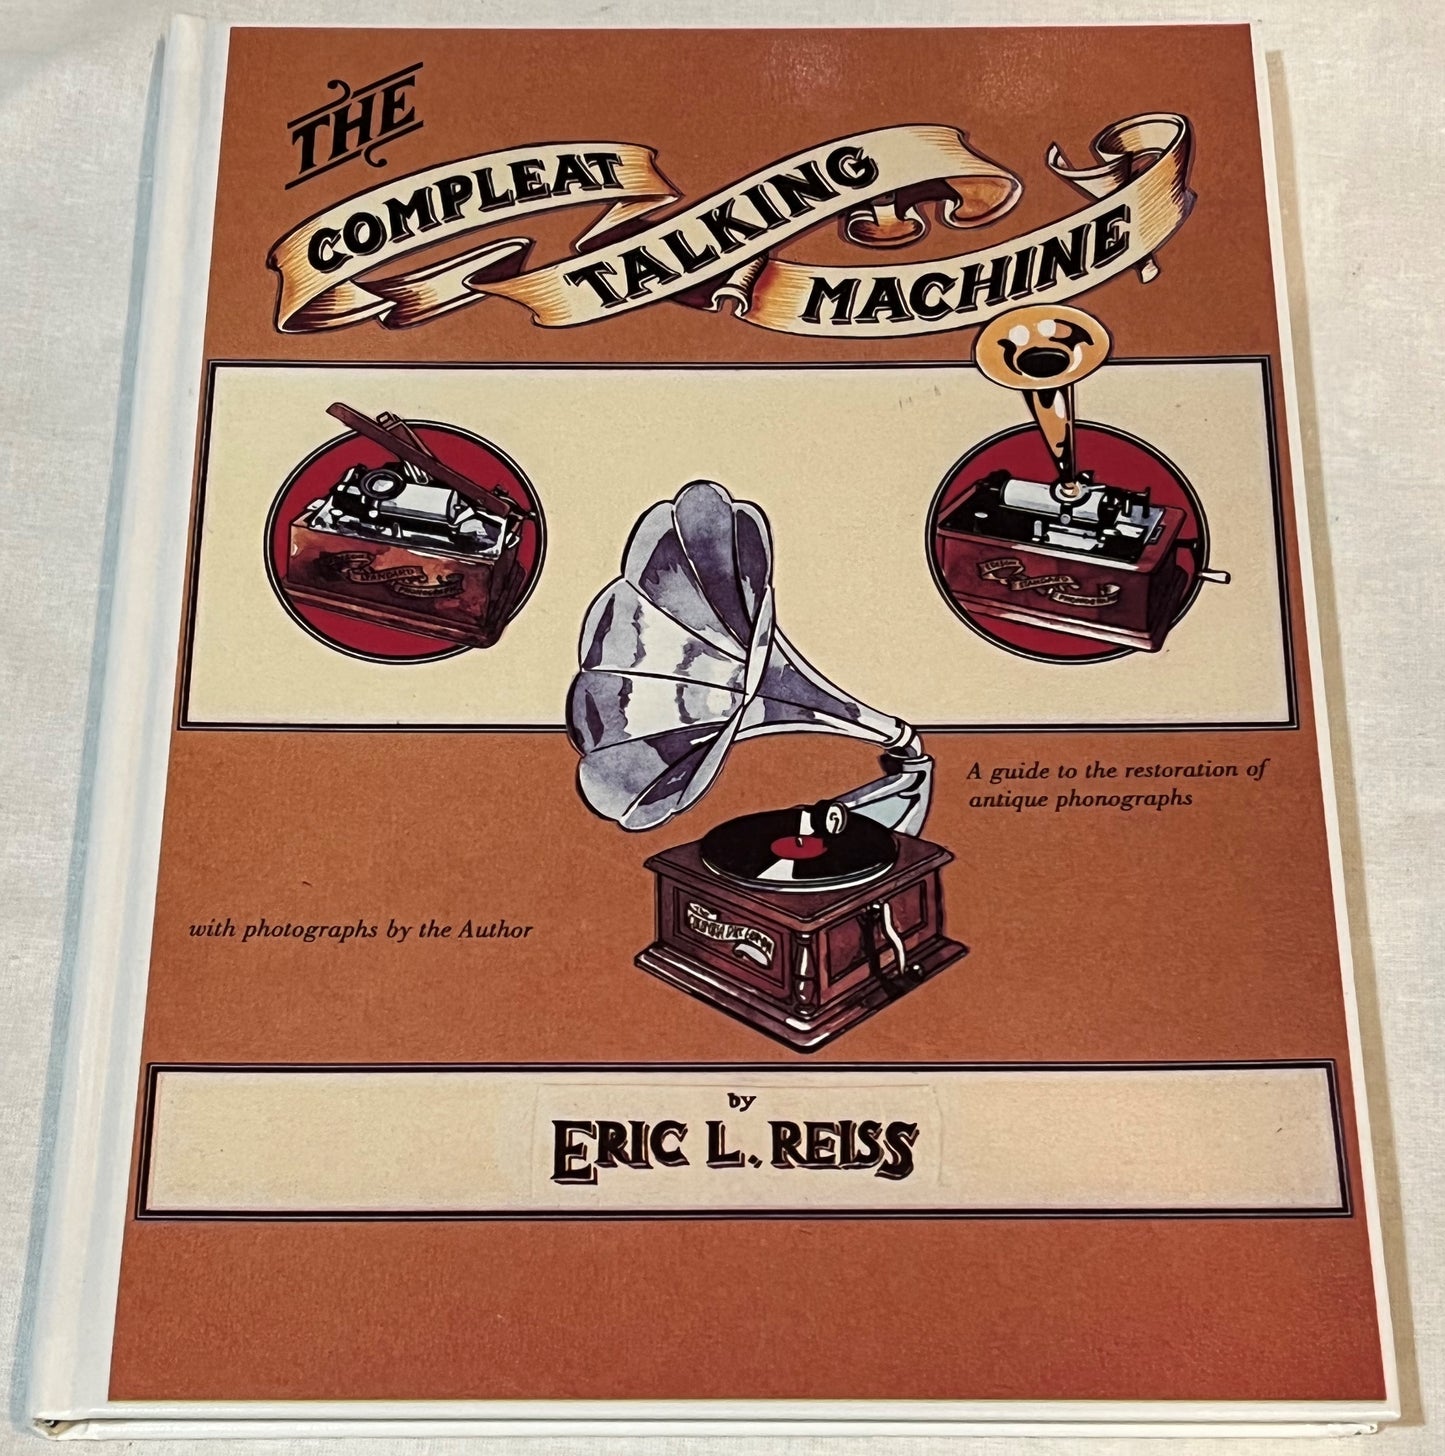 The Compleat Talking Machine by Eric L. Reiss - Hardback